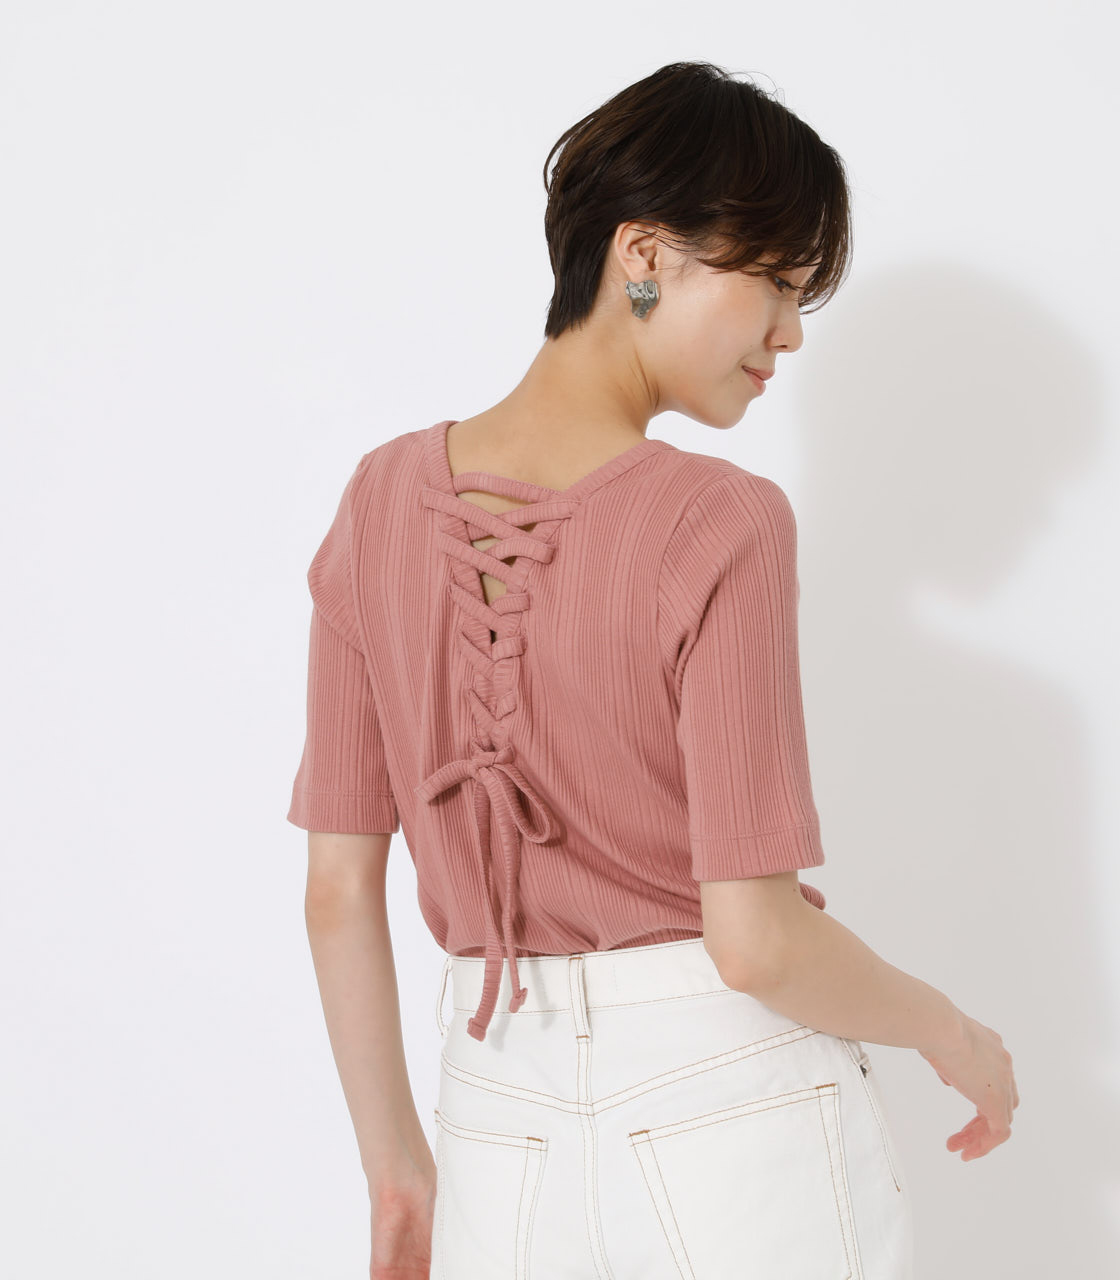 BACK LACE UP TOPS/バックレースアップトップス 詳細画像 PNK 1